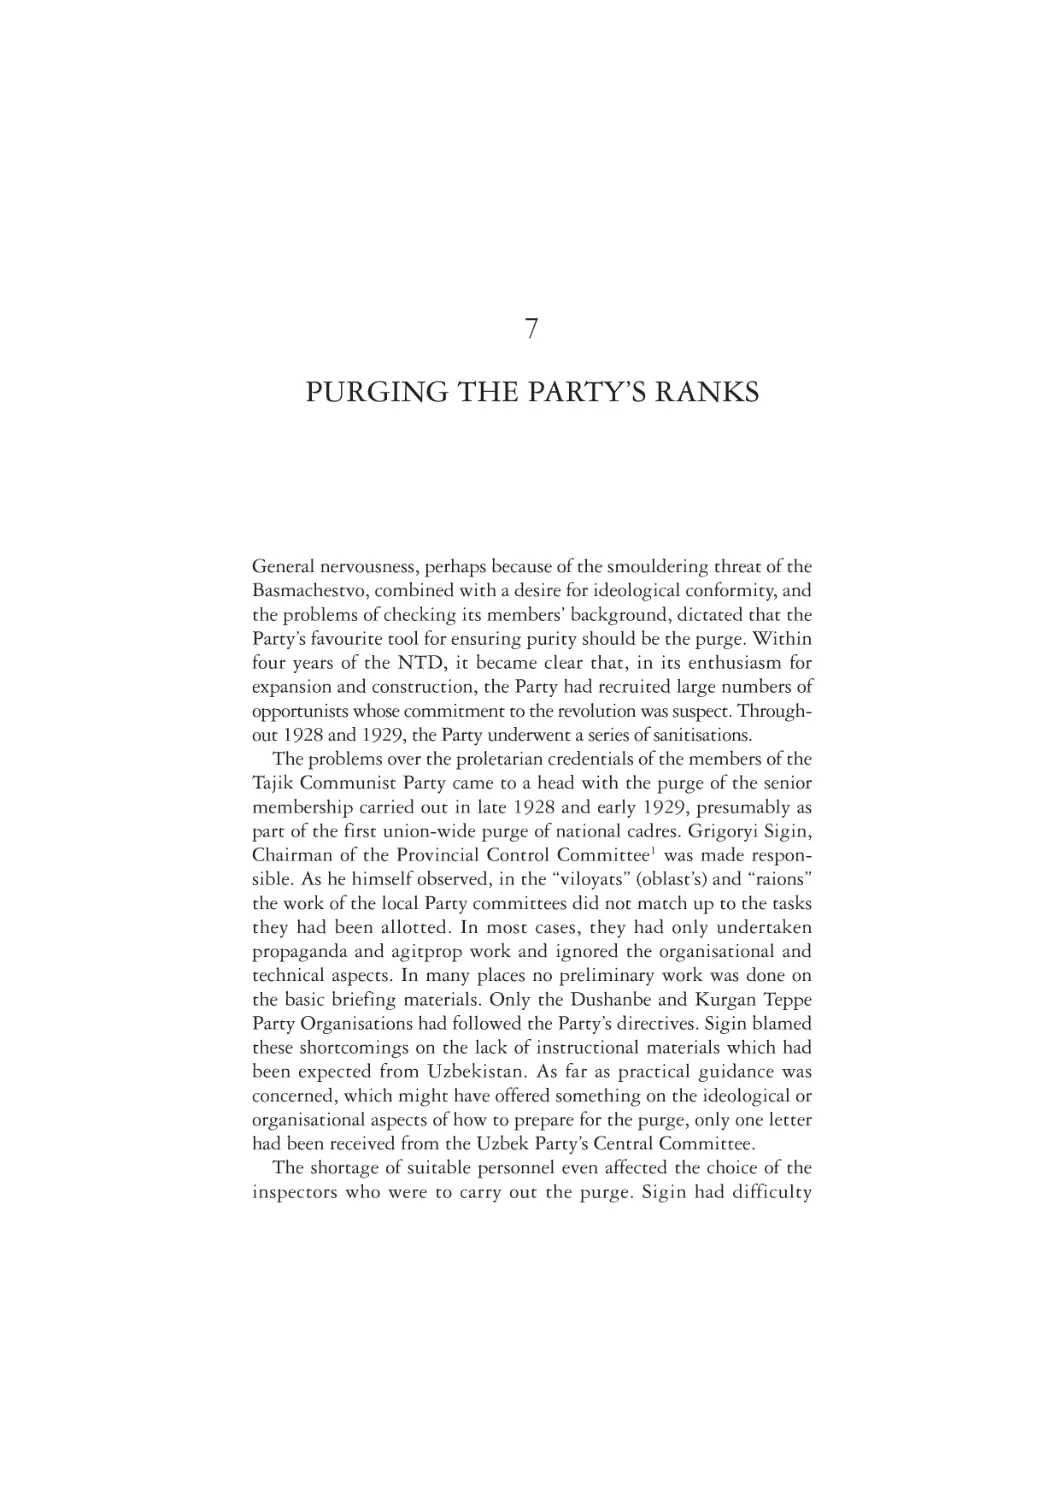 7. Purging the Party's Ranks